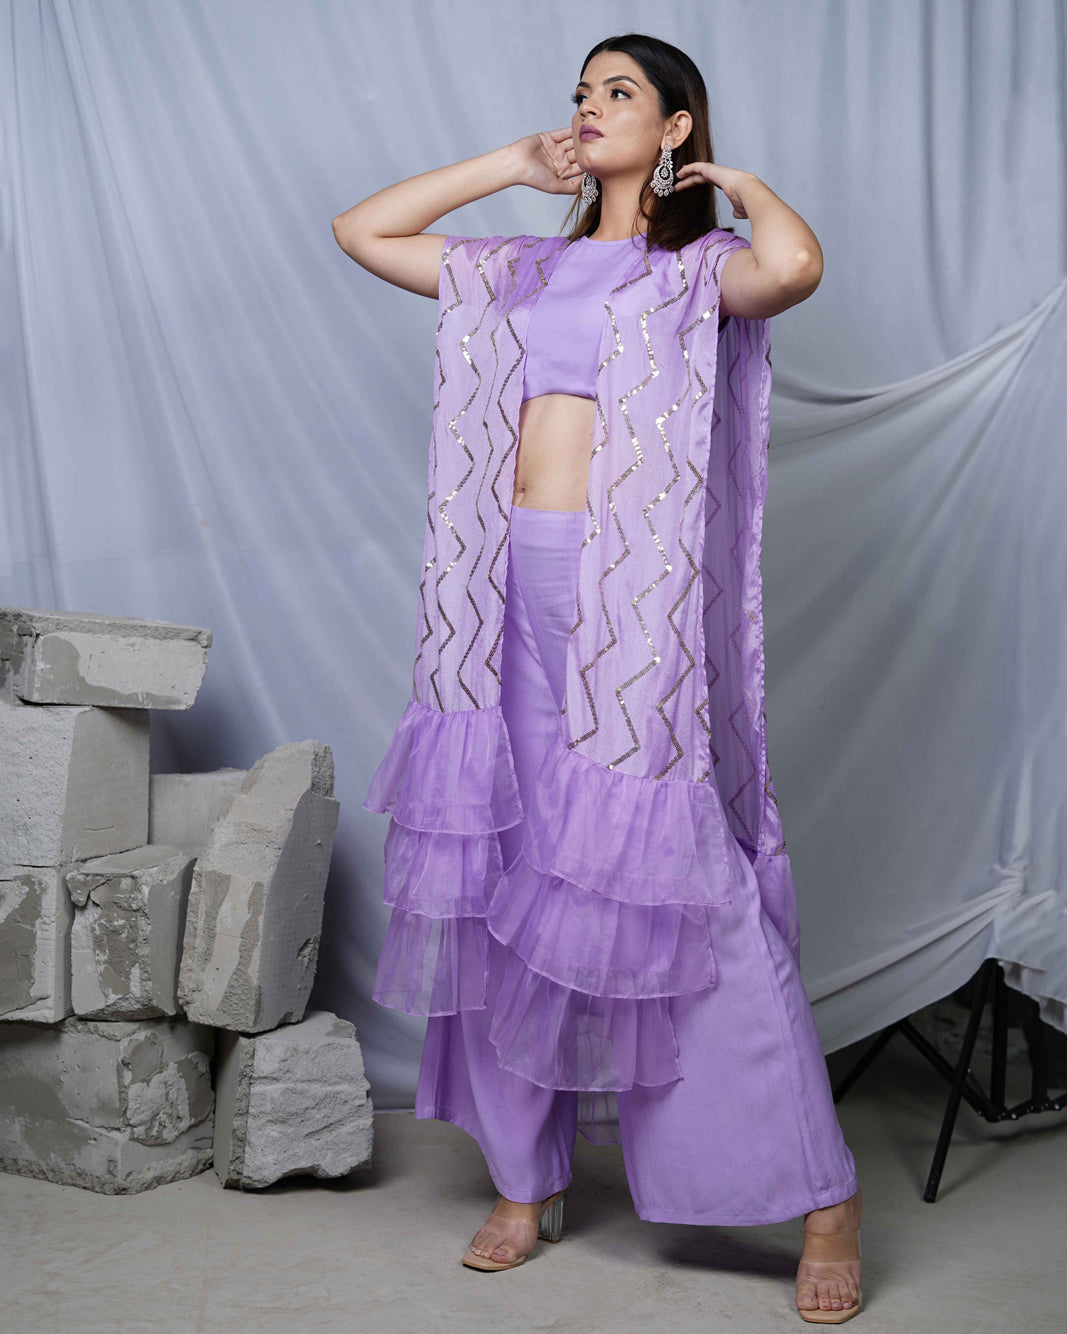 Chandani Lavender Party Indo-Western Co-ord Set For Women with Cape and Frill Details